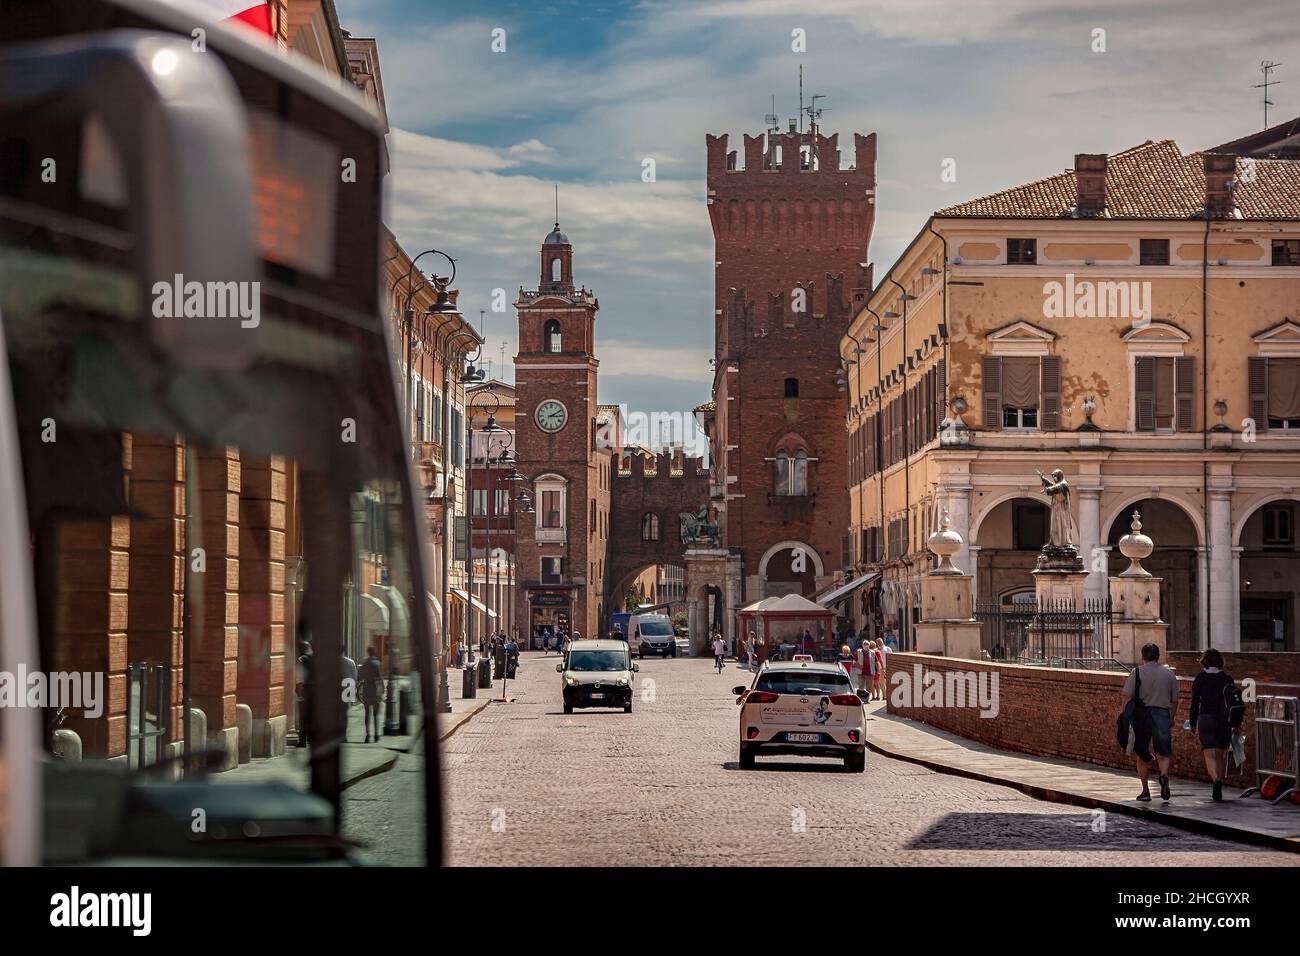 FERRARA, ITALY 29 JULY 2020 : Evocative view of the road leading to the historic center of Ferrara with a view of the castle and life on the road Stock Photo